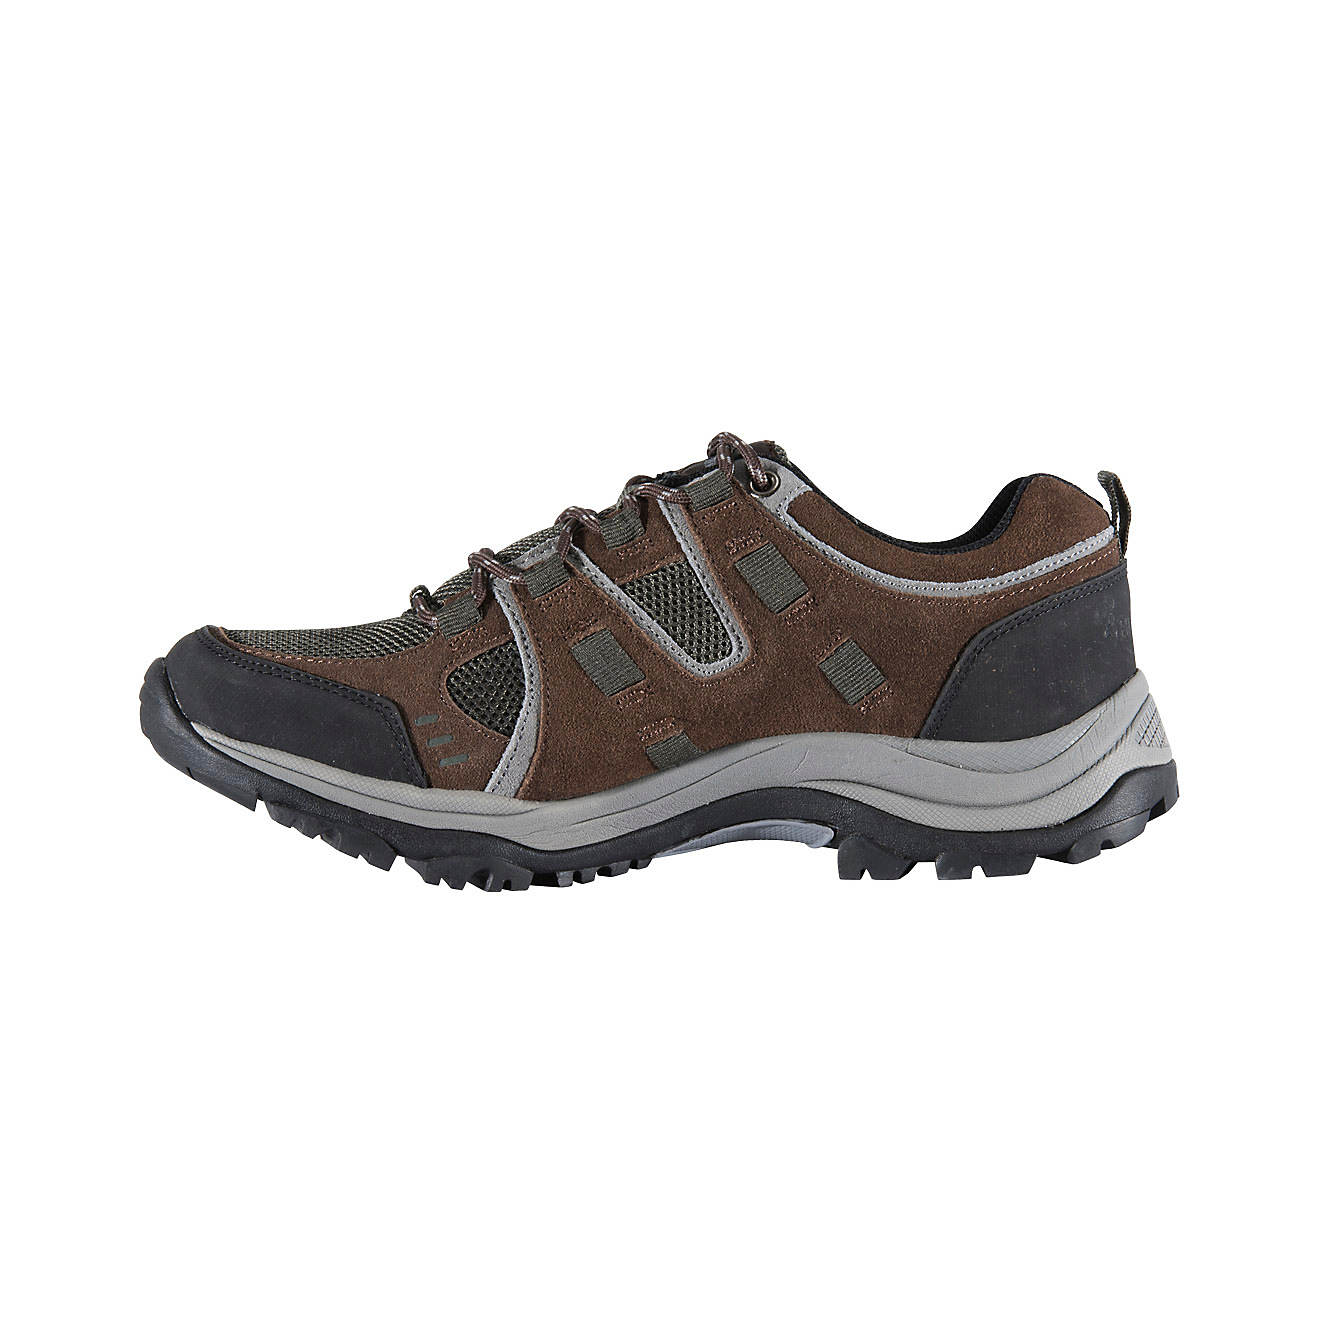 Browning Men's Buck Pursuit Trail Hiking Shoes | Academy